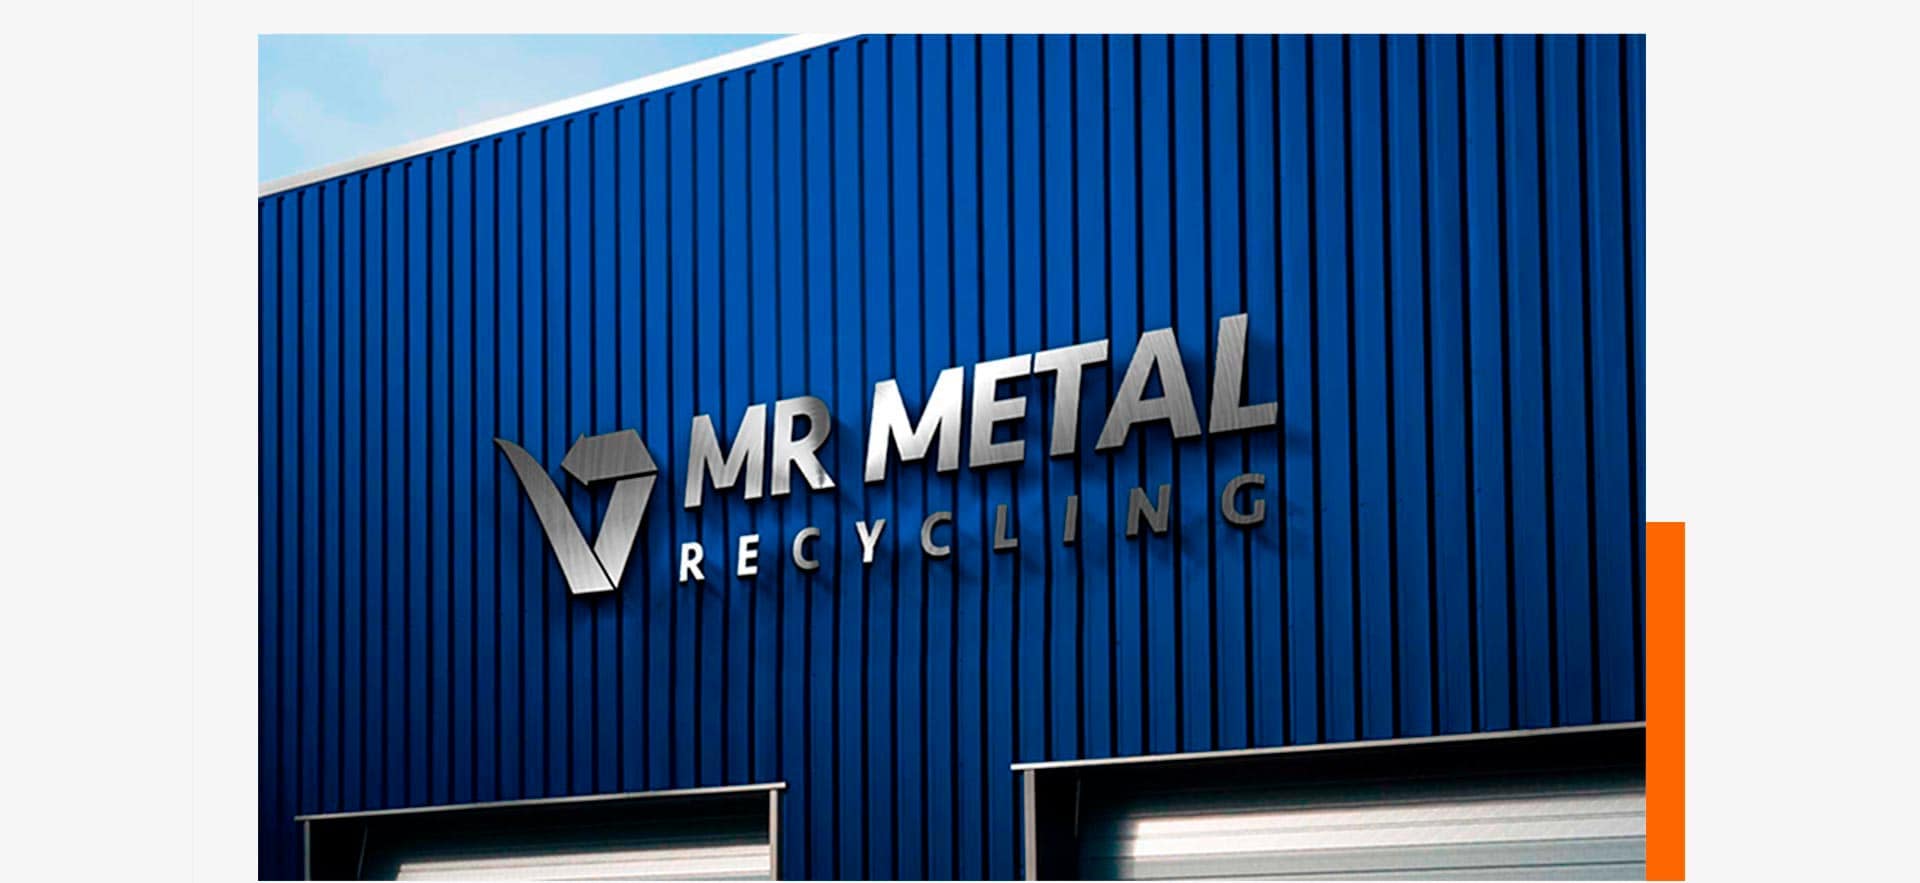 Mr Metal Recycling Sign